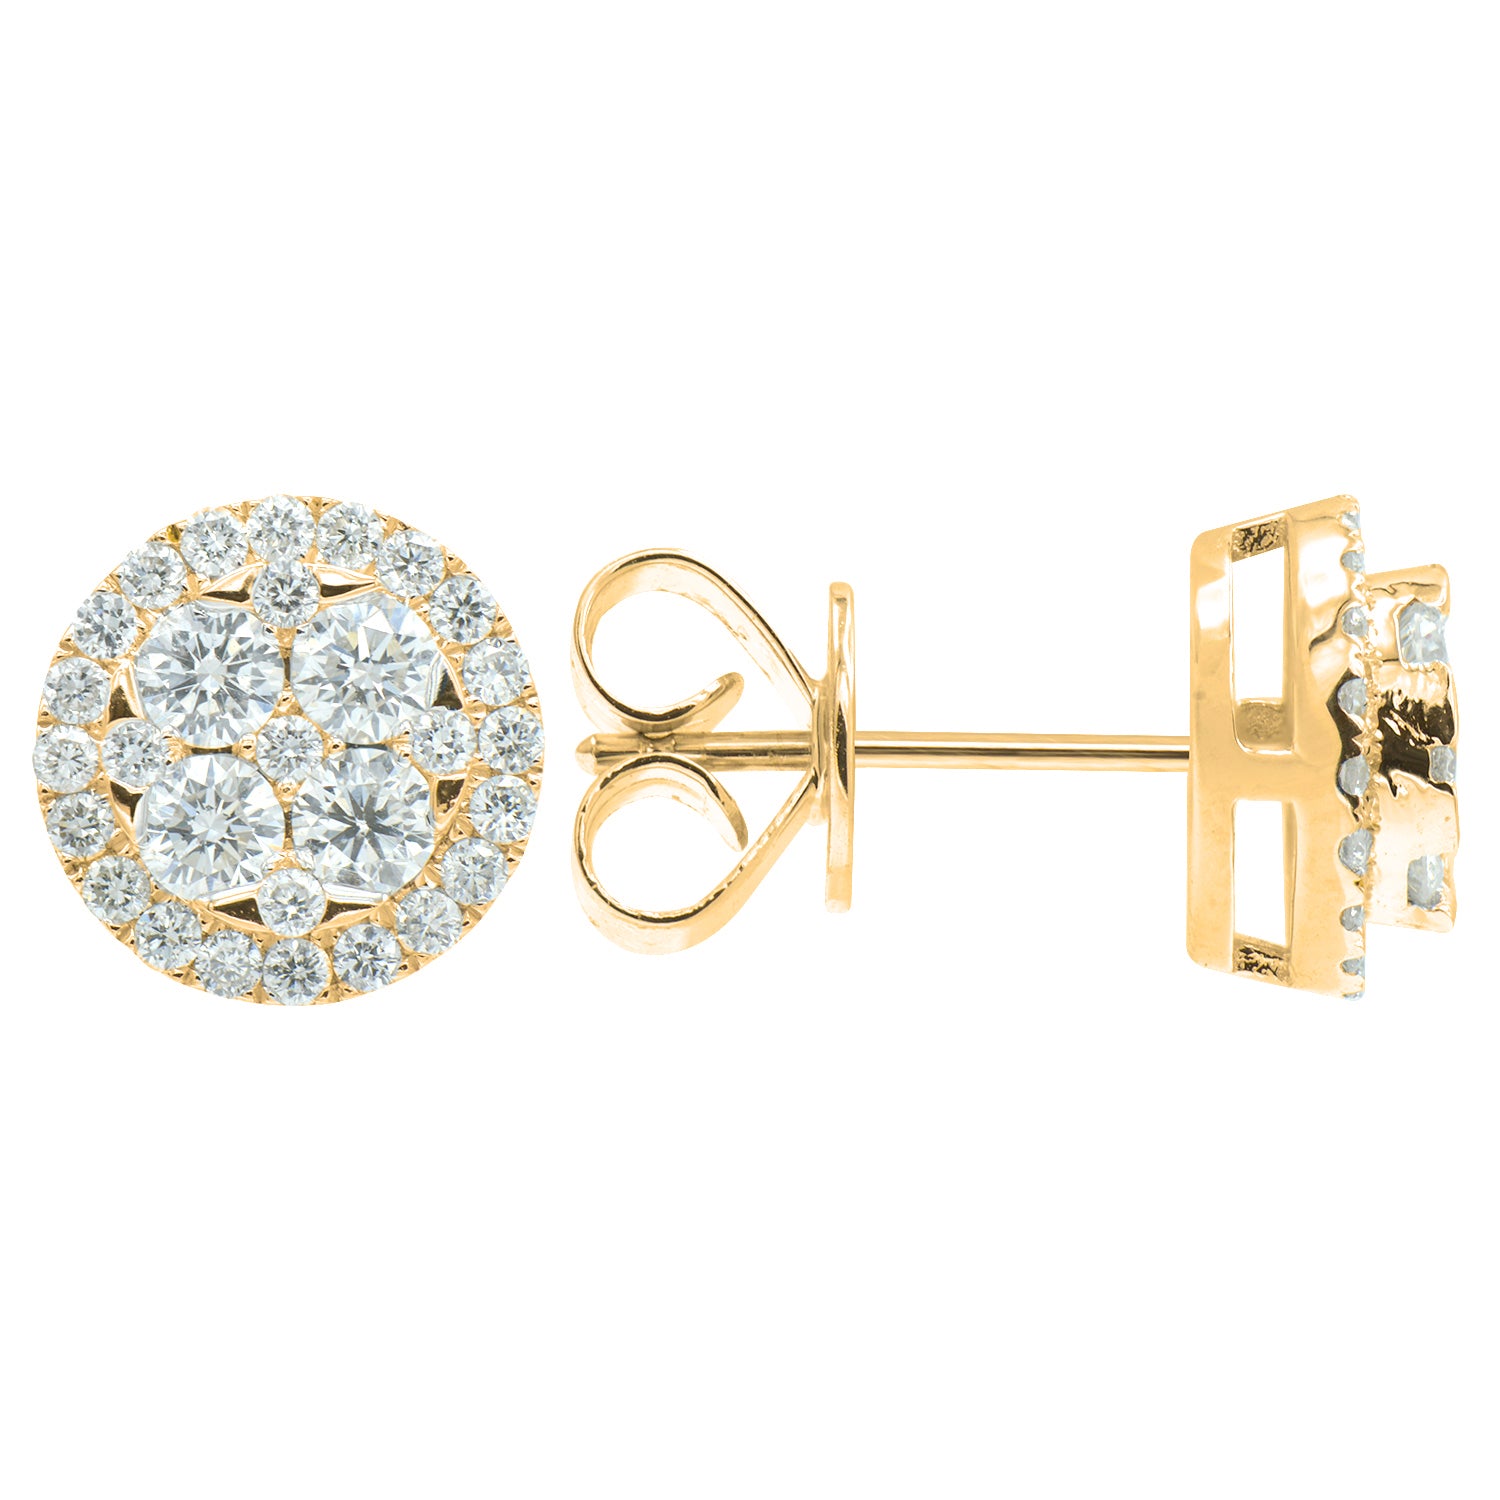 Earrings 18KY/2.8G 8RD-0.64CT 50RD-0.33CT 1.0CT-SIZE